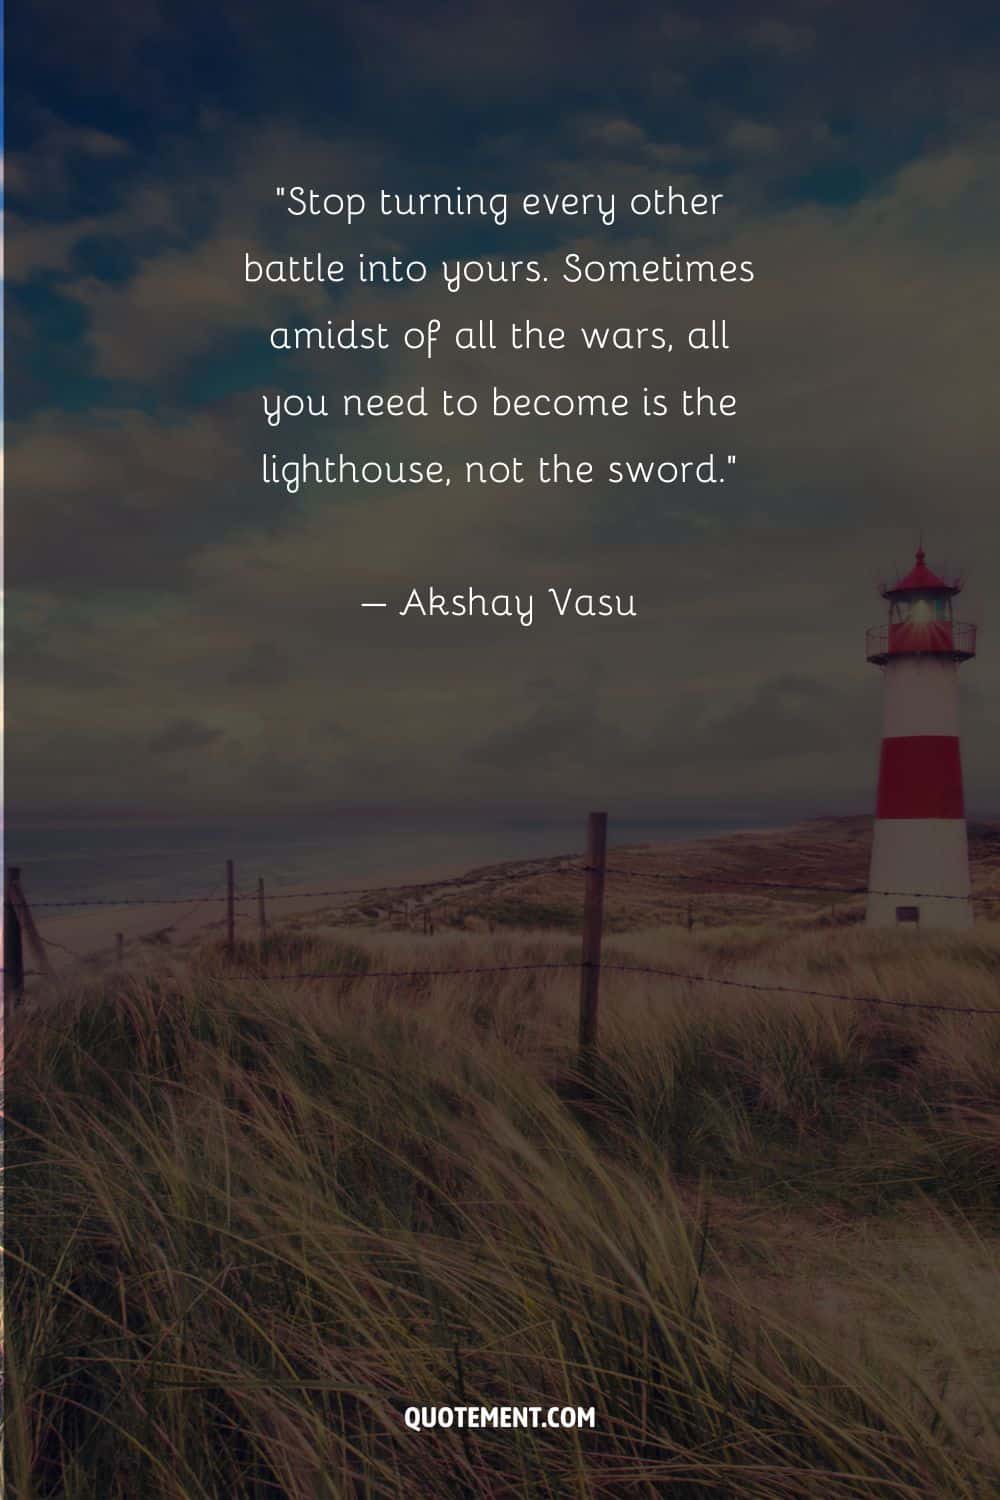 Motivational quote by Akshay Vasu and a lighthouse in the background